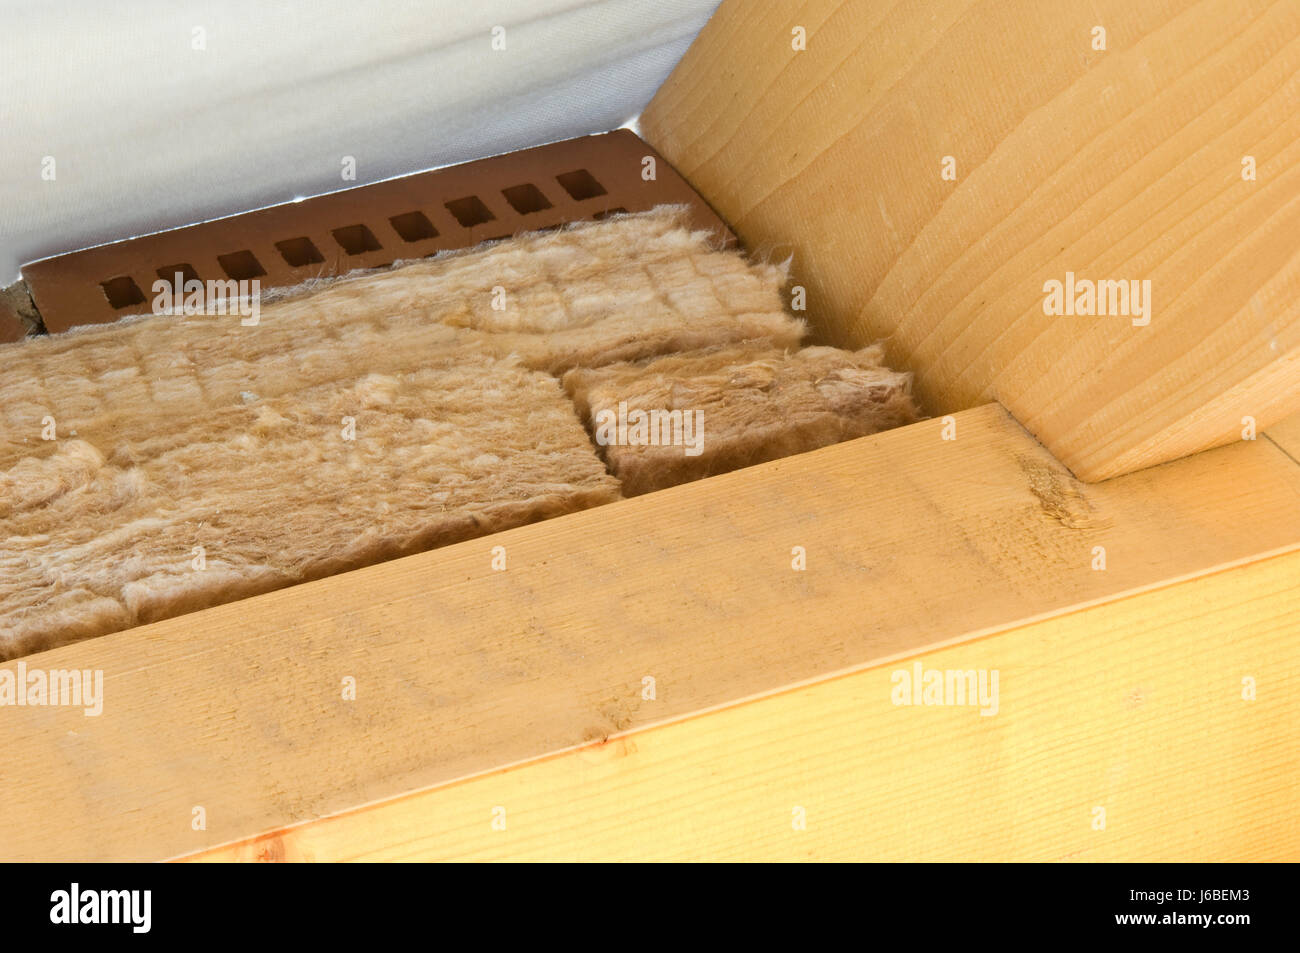 insulate insulation rooftop build foil insulate insulation roof beam energy Stock Photo